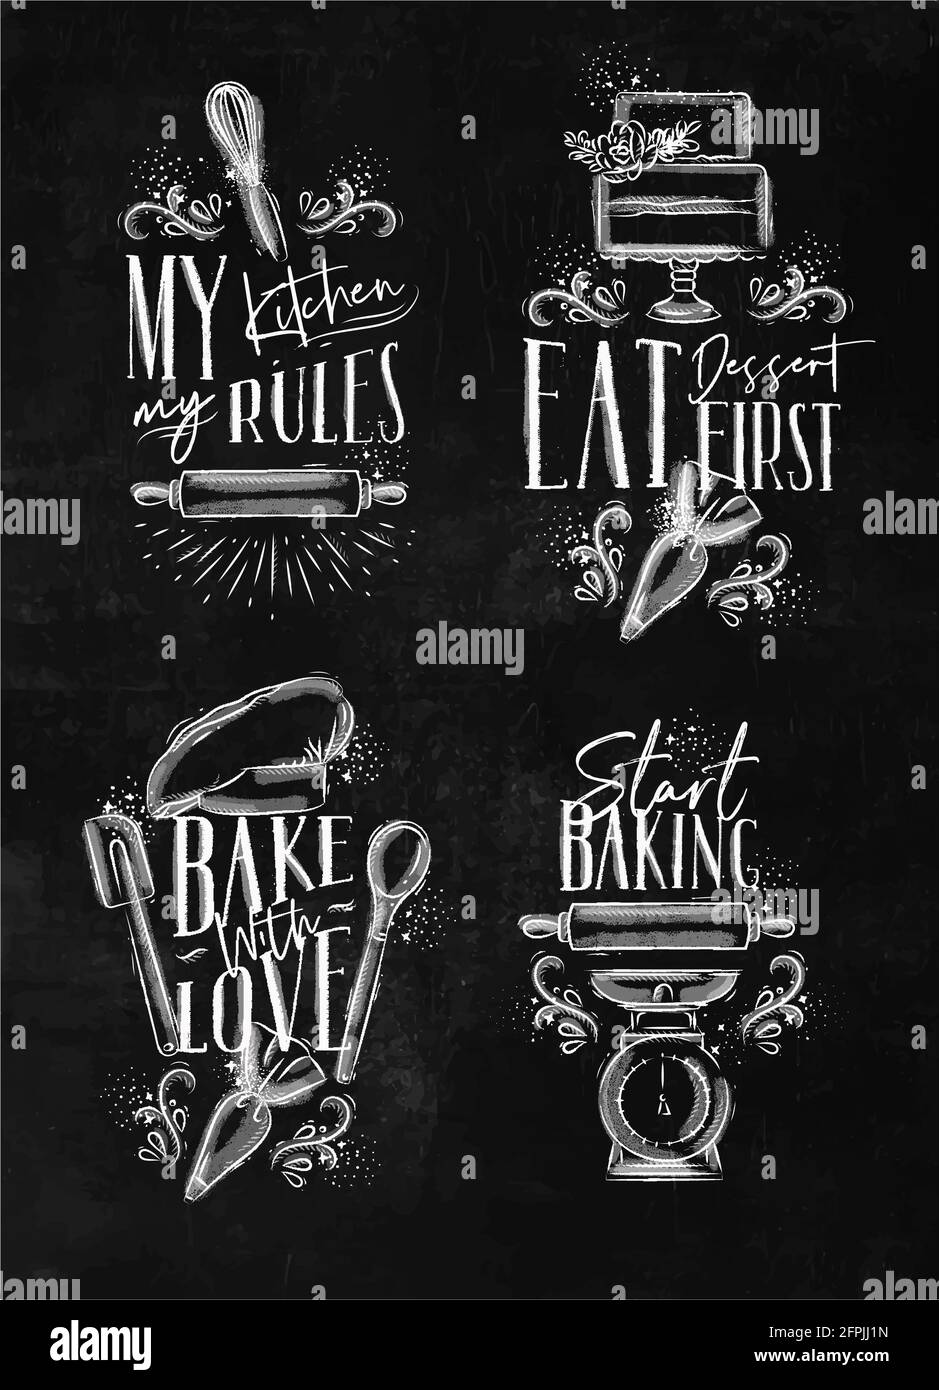 Set of bakery letterings my kitchen rules, eat dessert first, bake with love in hand drawing style on chalk background. Stock Vector